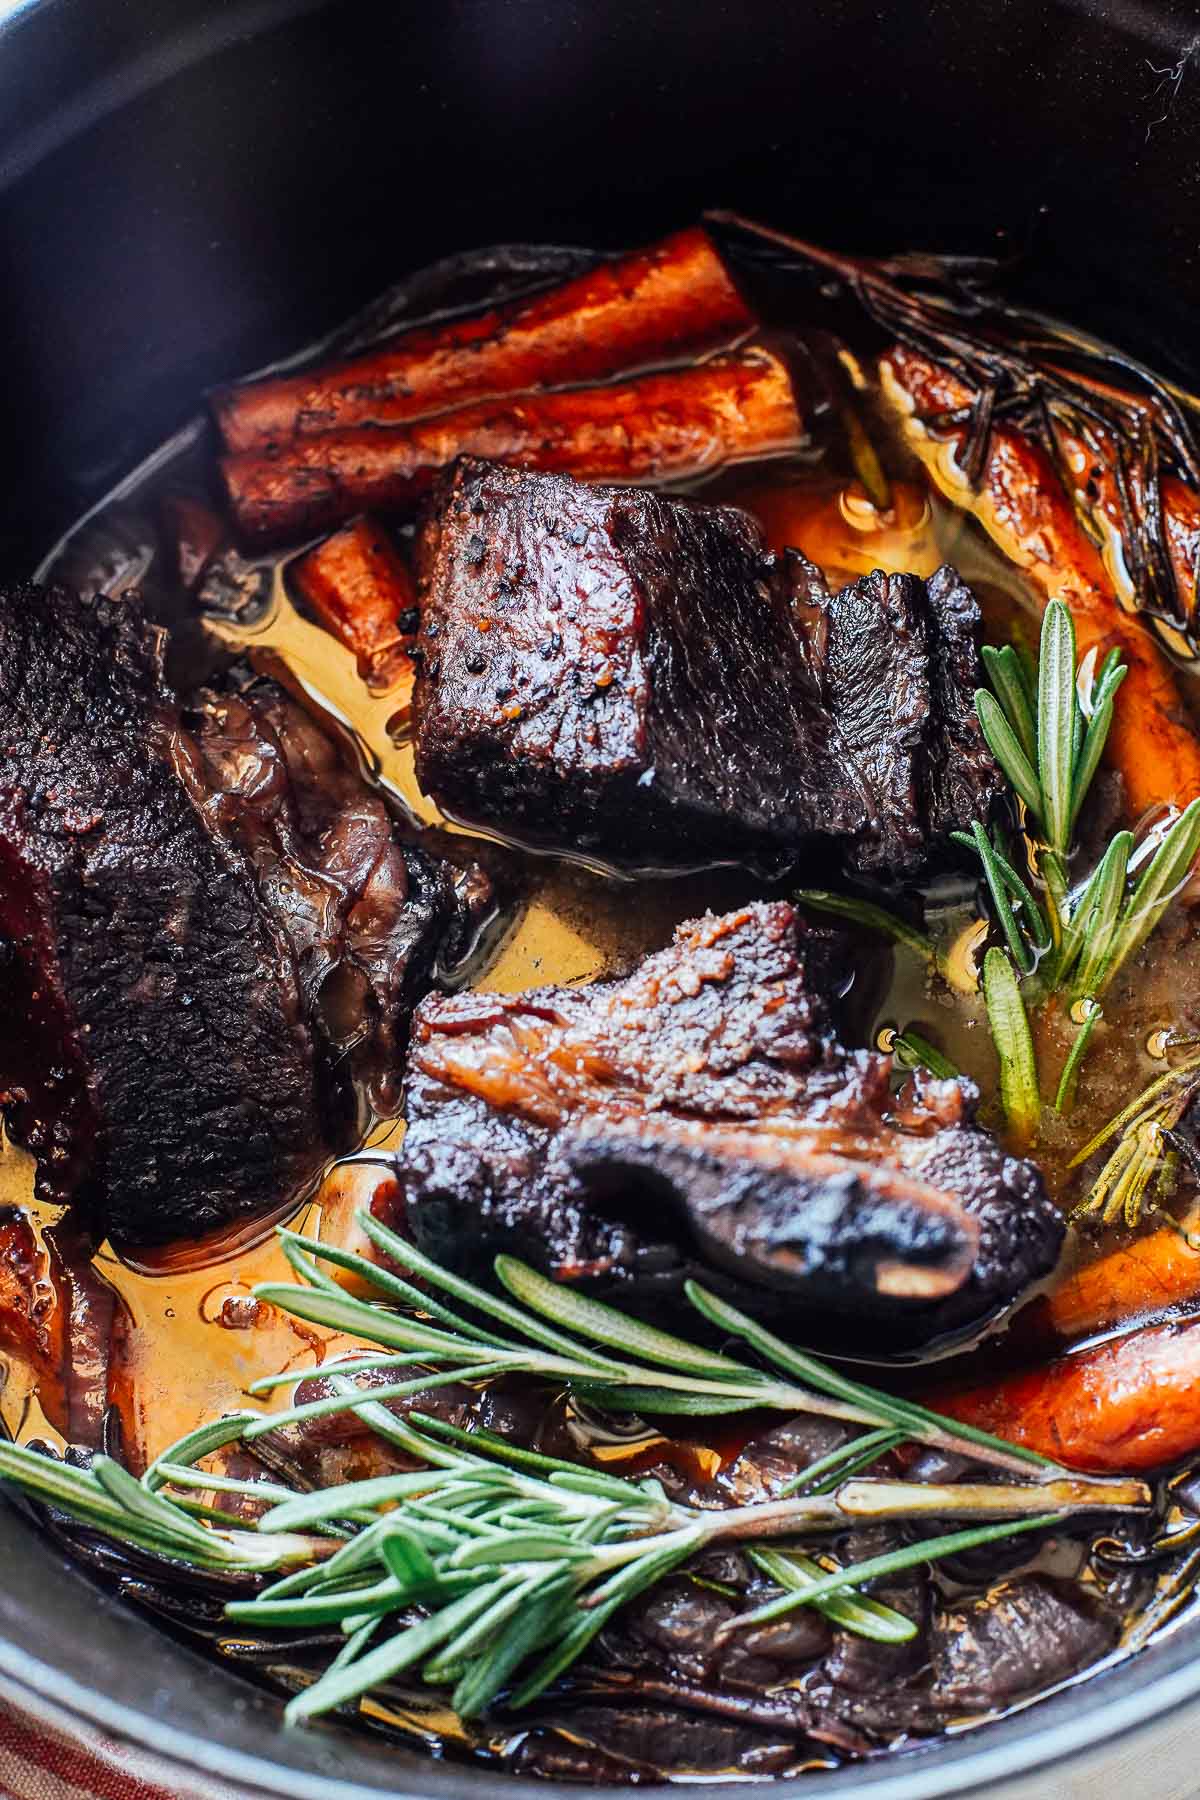 Simple Braised Beef Short Ribs Recipe in the Oven